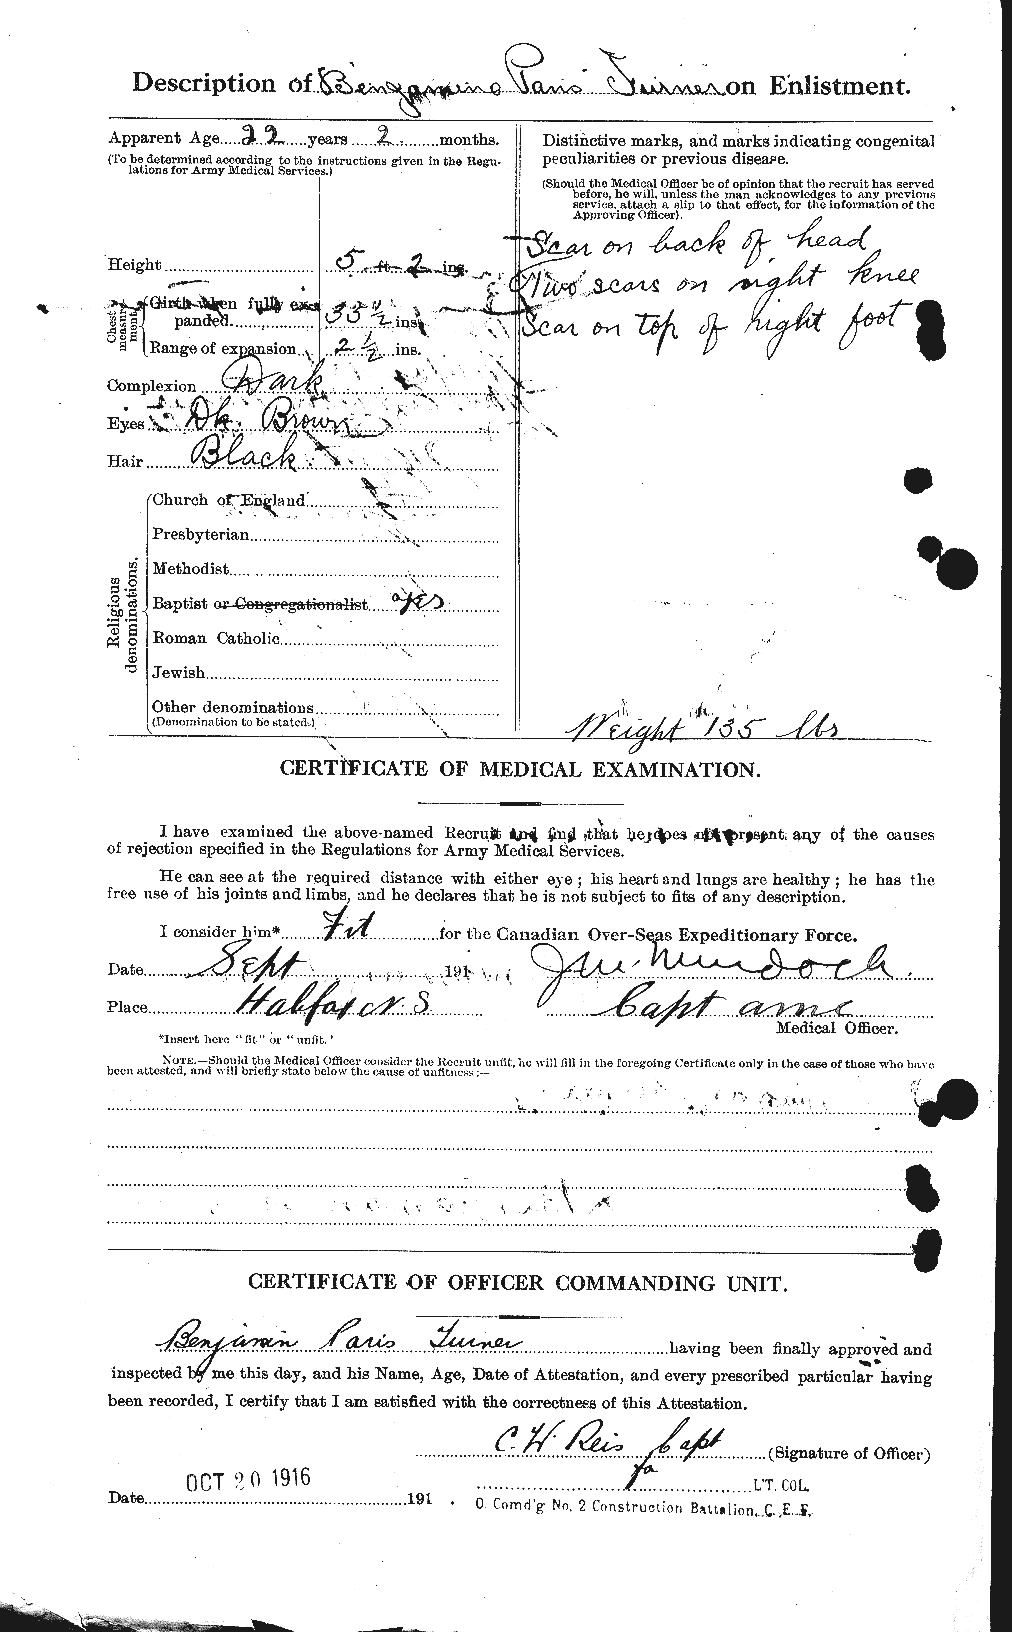 Personnel Records of the First World War - CEF 646335b